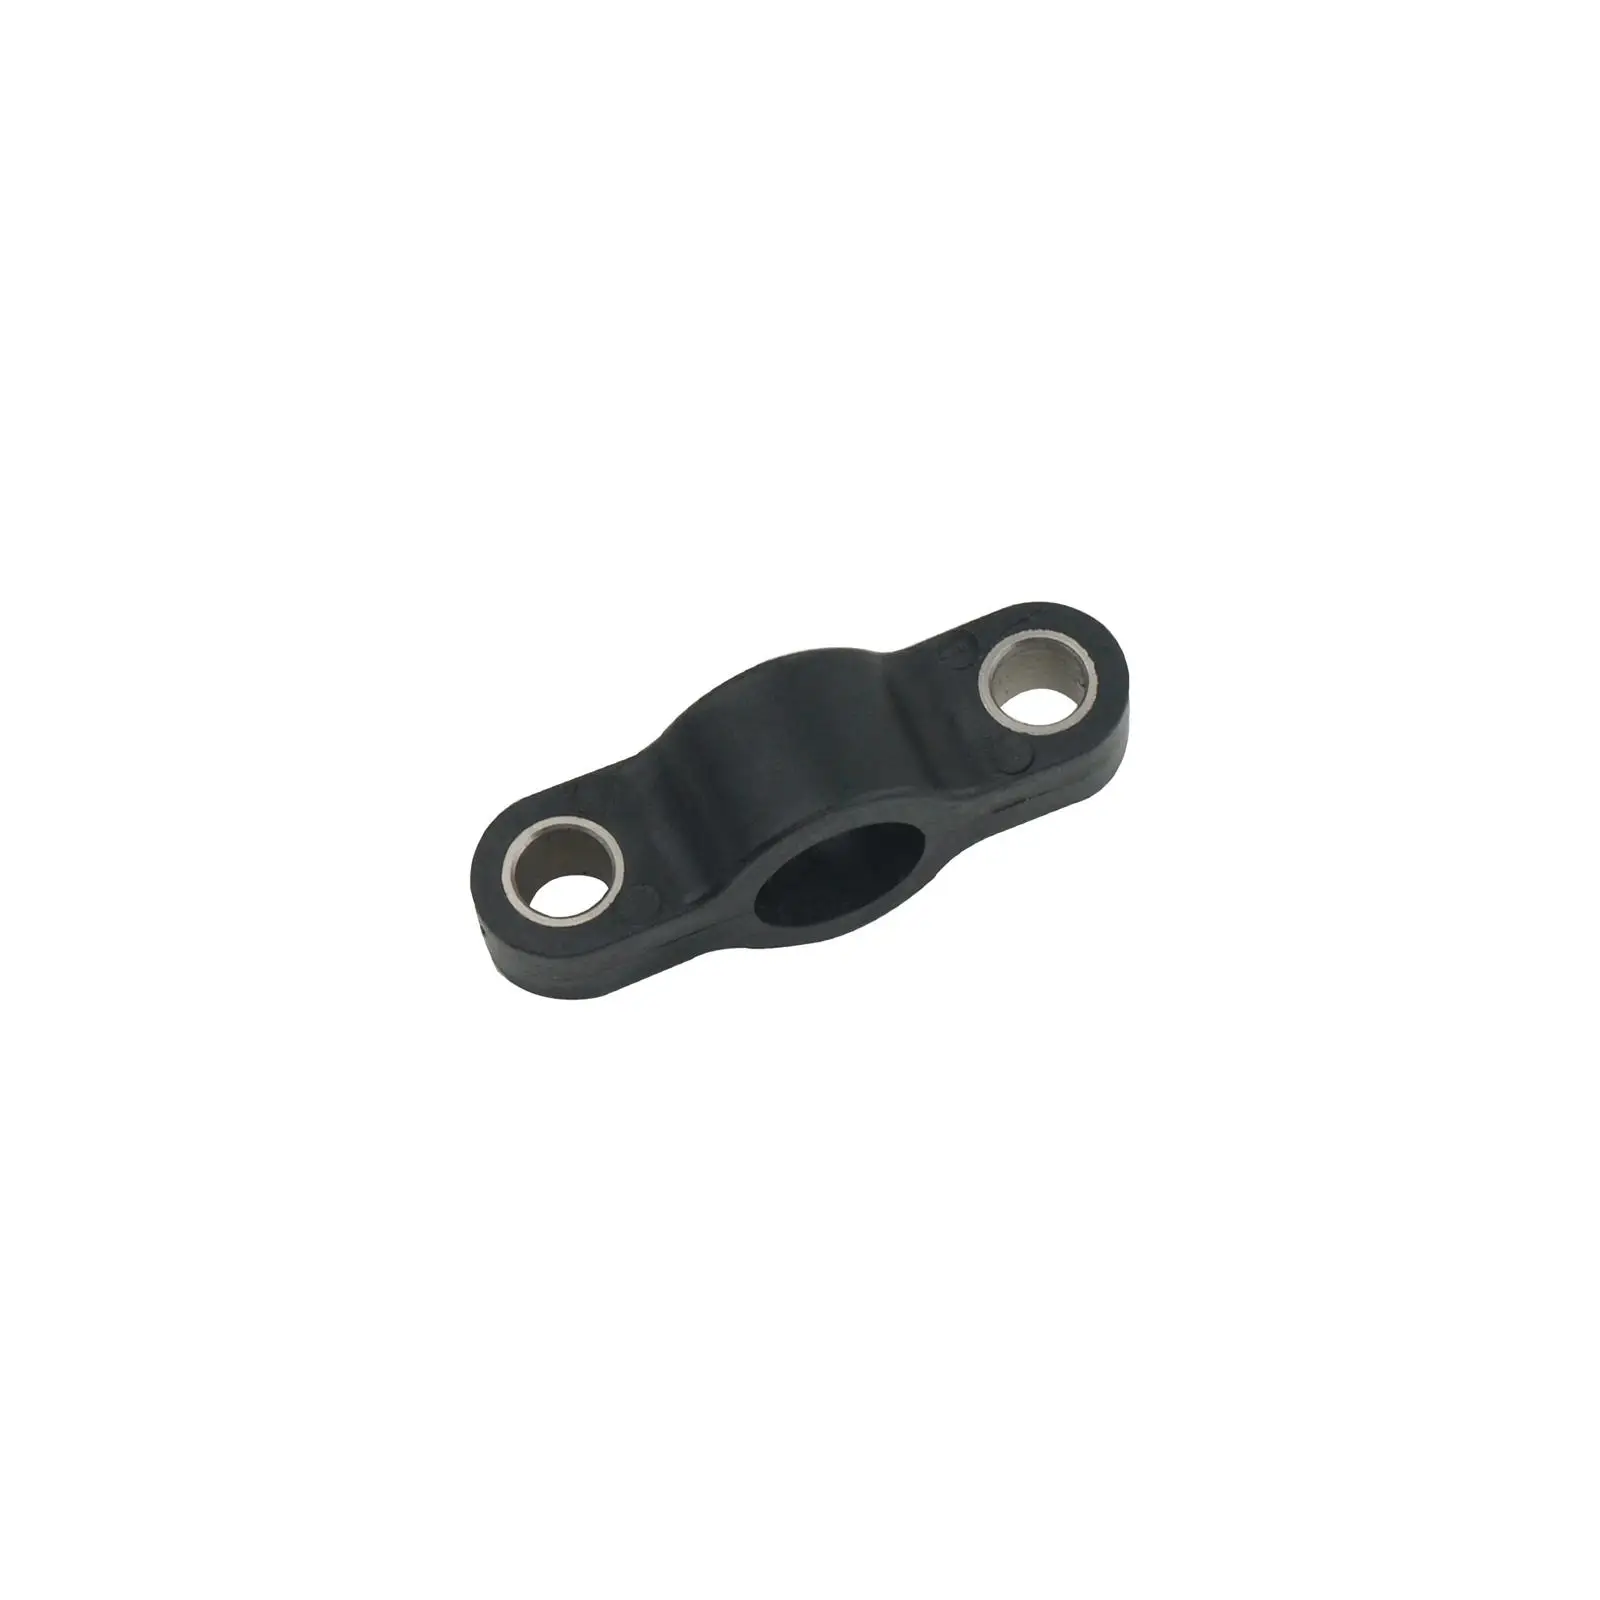 Bracket 6F5-41662 F15-05040002 for Parsun Engine Stable Performance Easily Install Replacement Vehicle Repair Parts